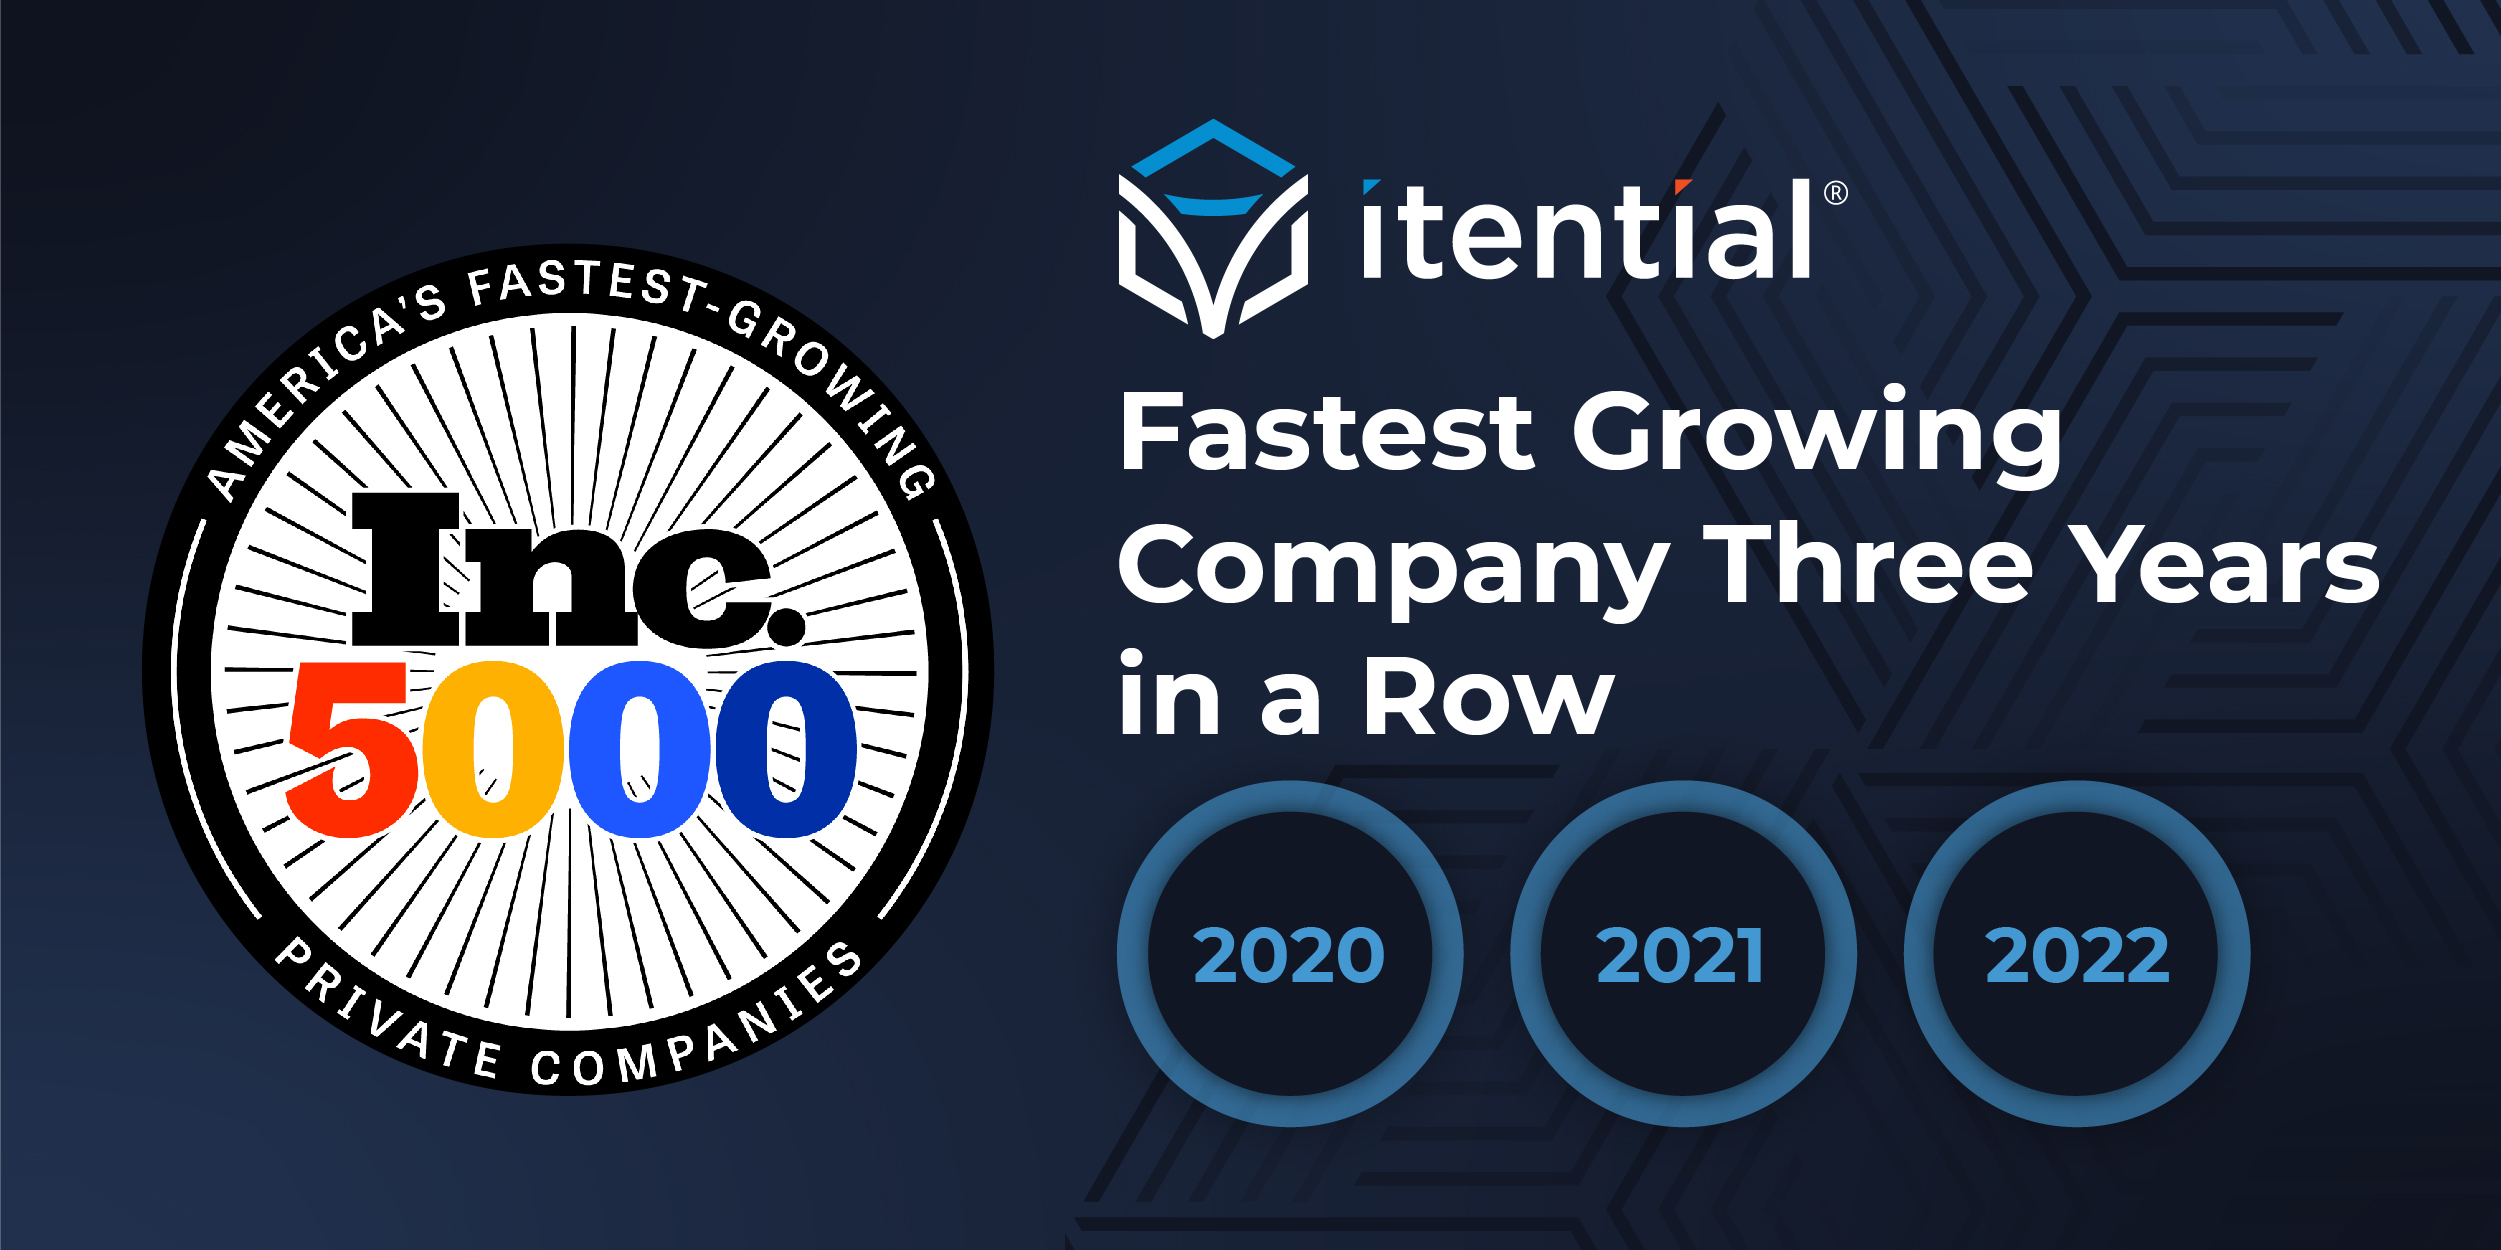 Redefining Network Automation & Orchestration Lands Itential on the Inc. 5000 for Three Years Running